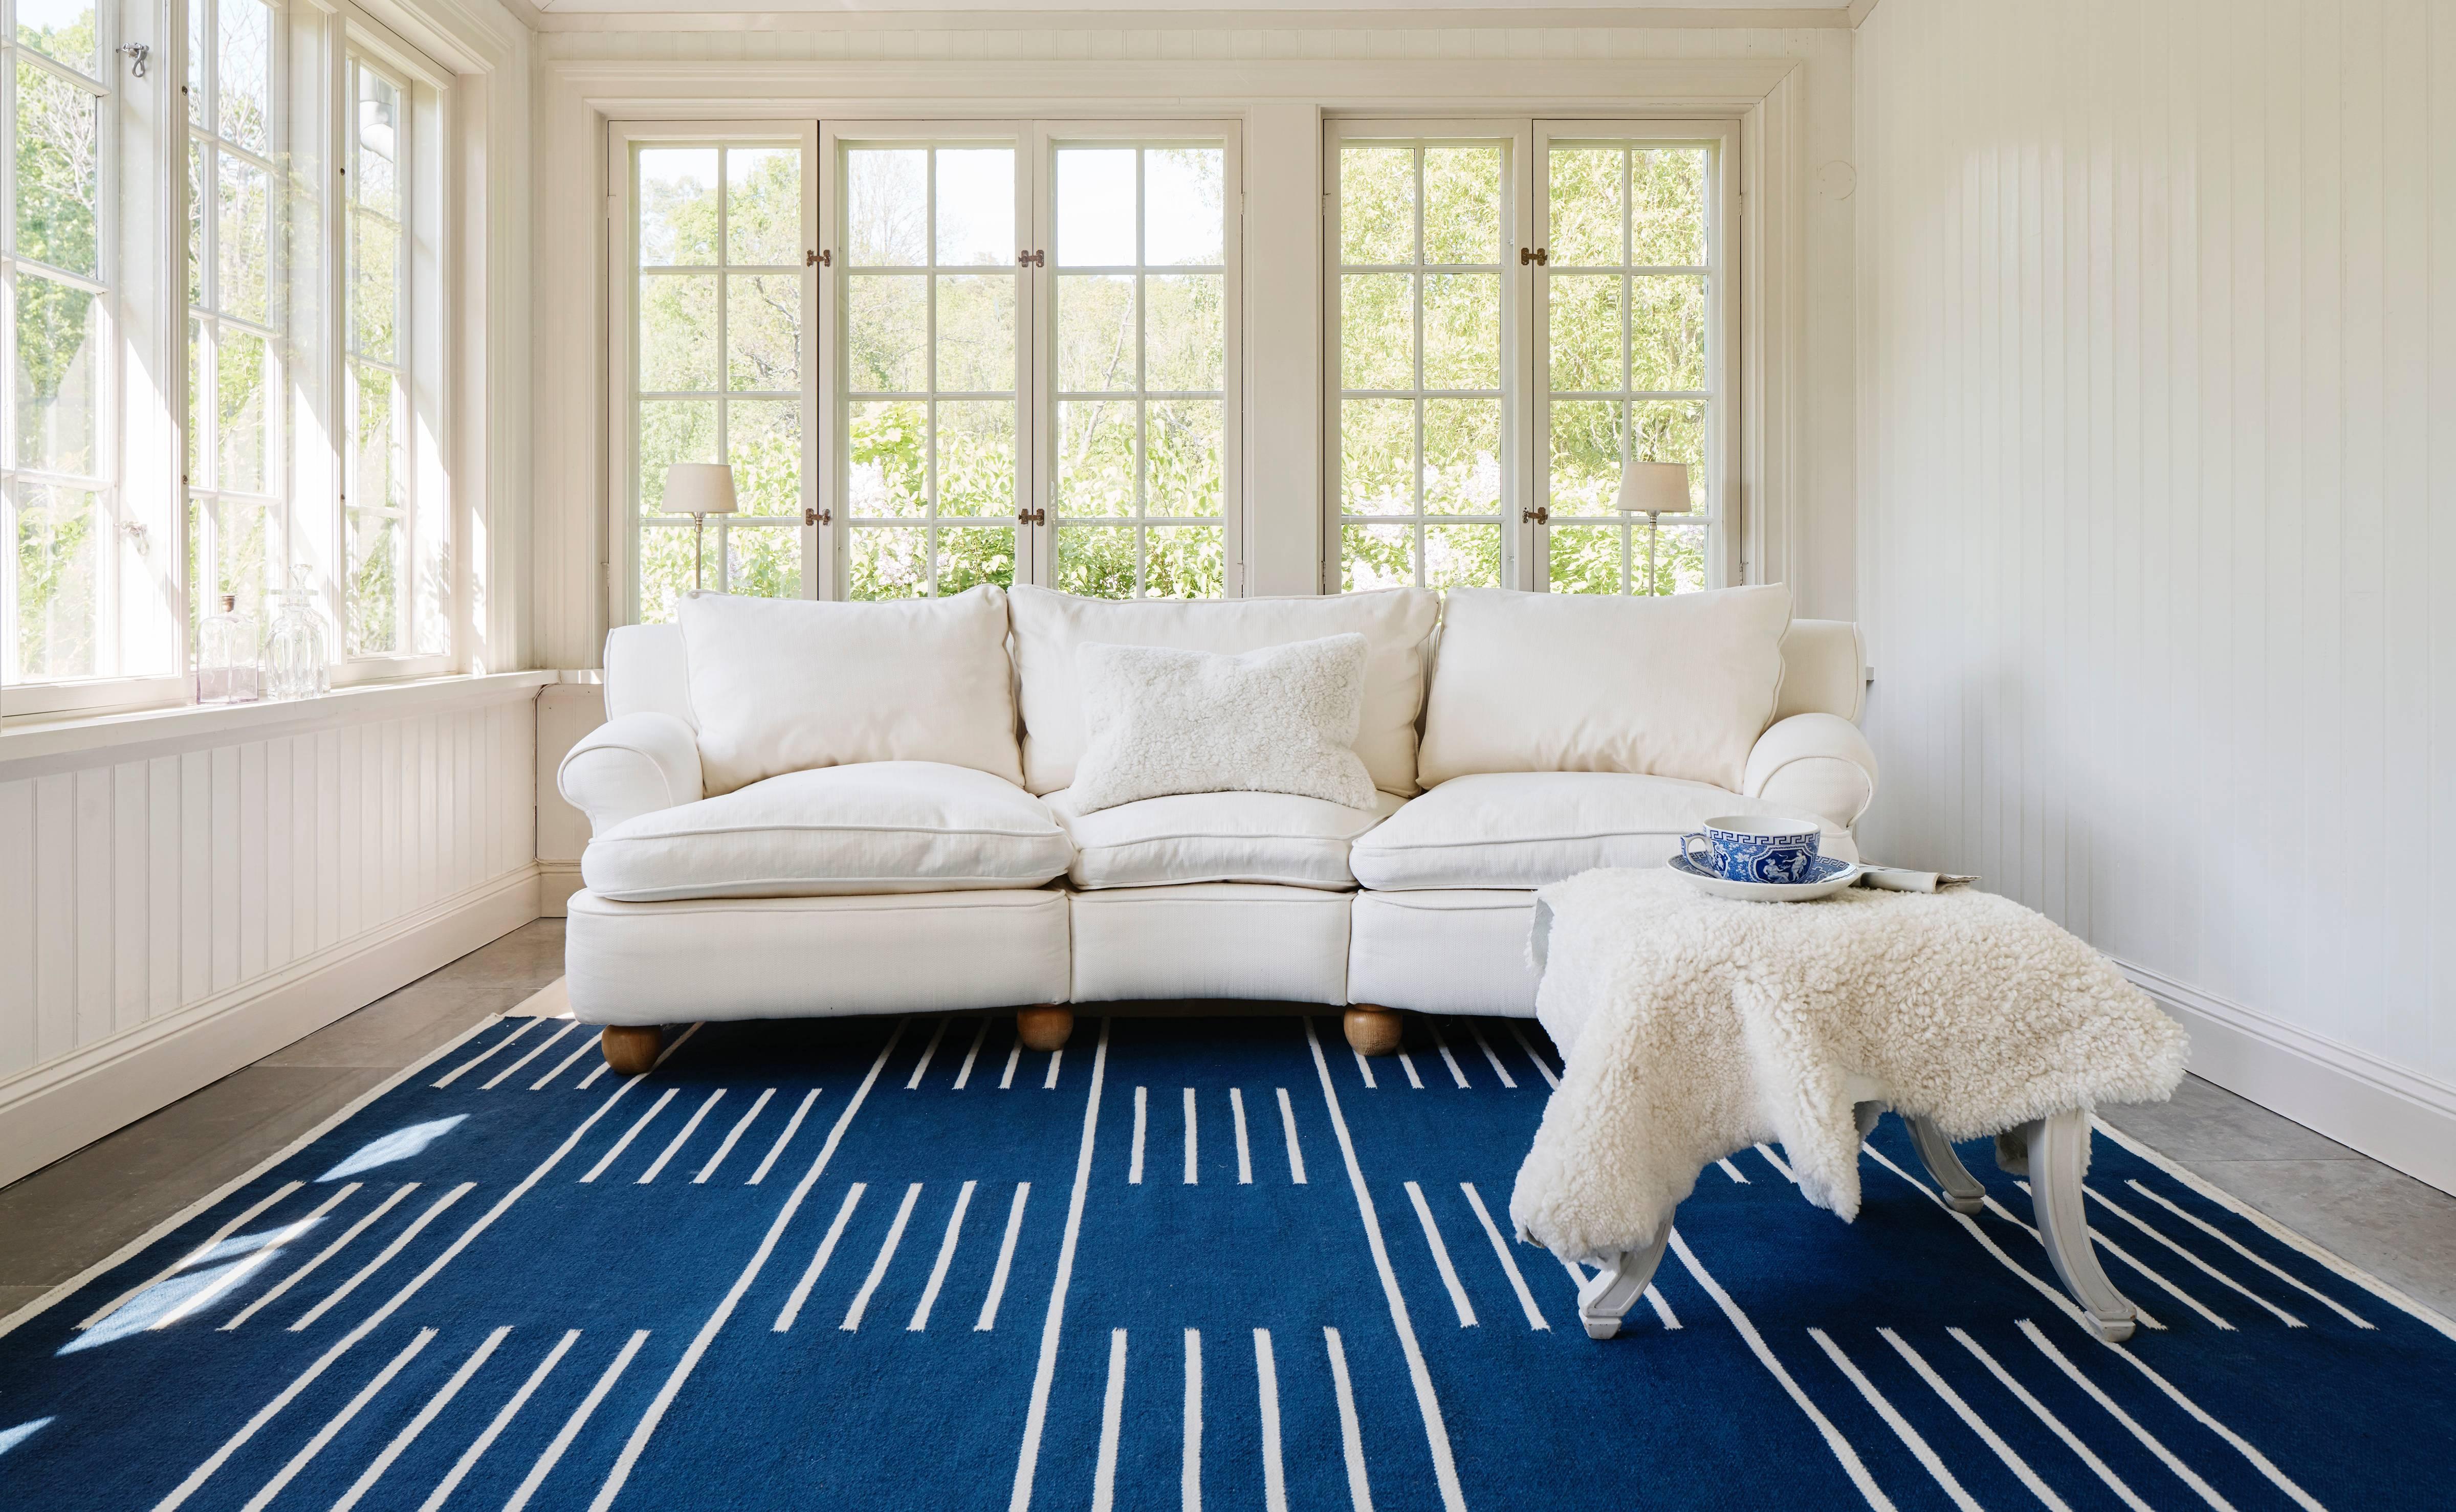 Classic Blue/Cream is a modern dhurrie/kilim rug in Scandinavian design. It is available in different sizes - see customization options below.

A traditional design inspired by classic Scandinavian patterns. The rug is available in contrasting